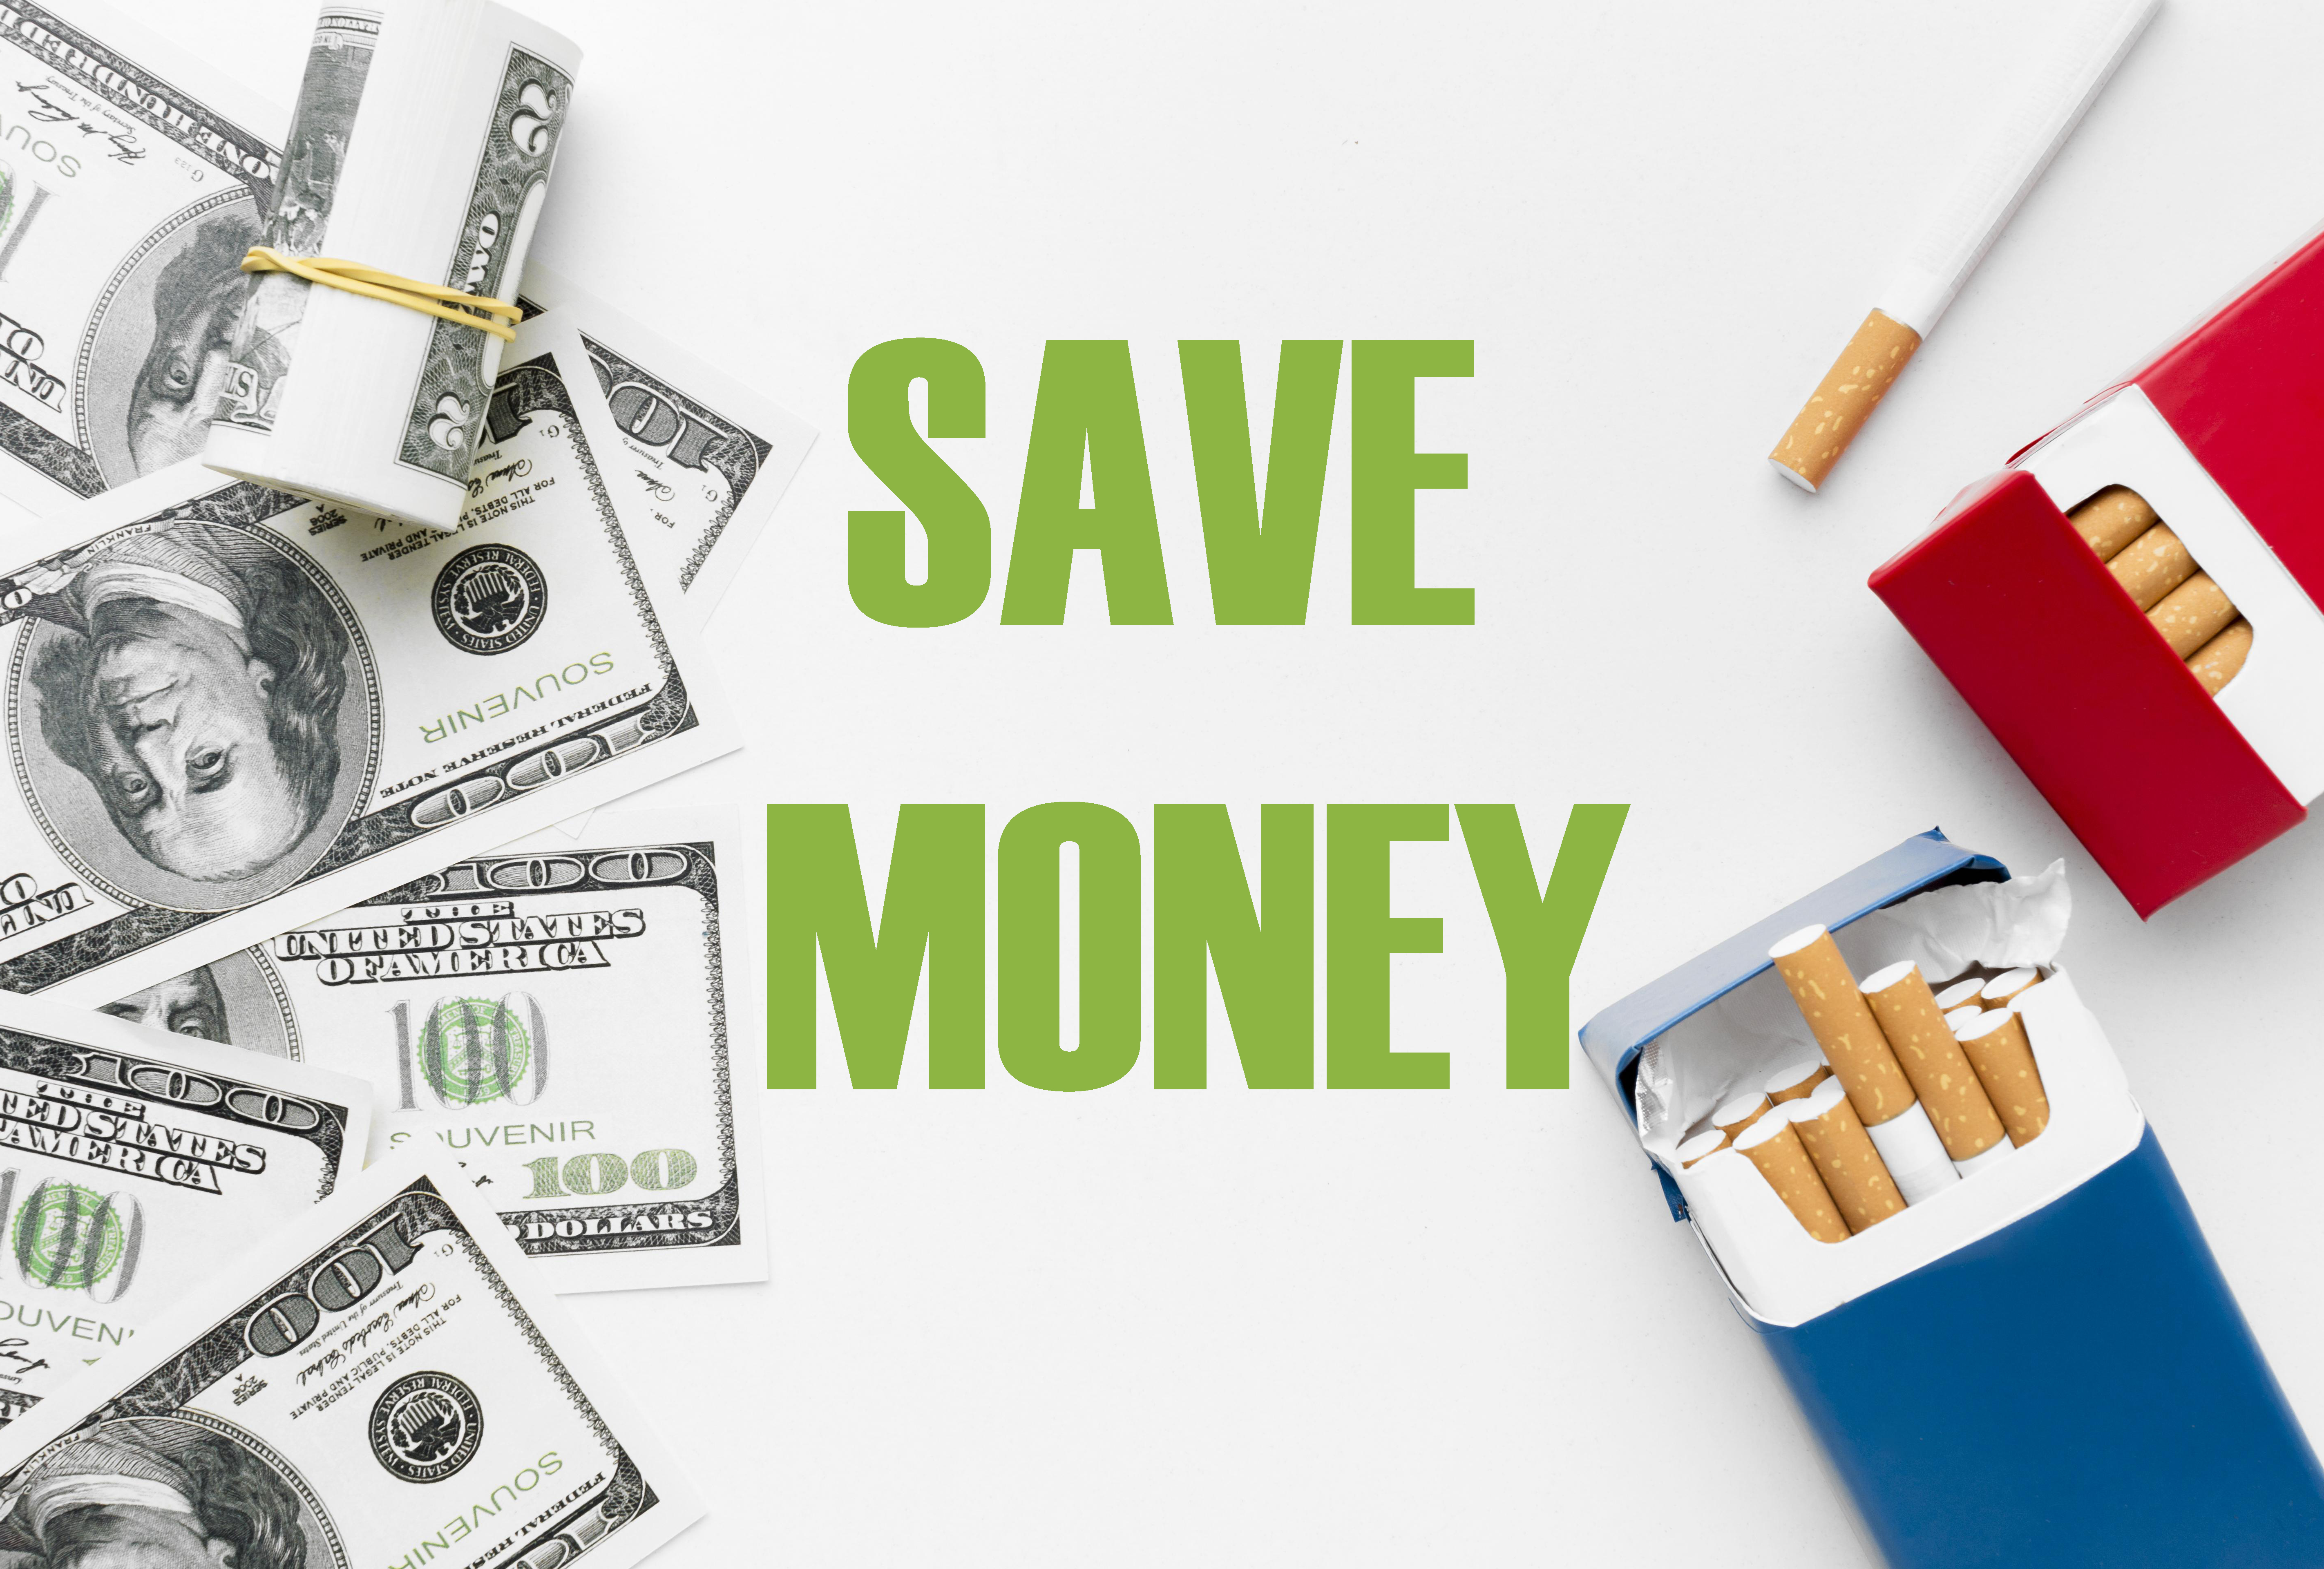 Save money by not buying cigarettes